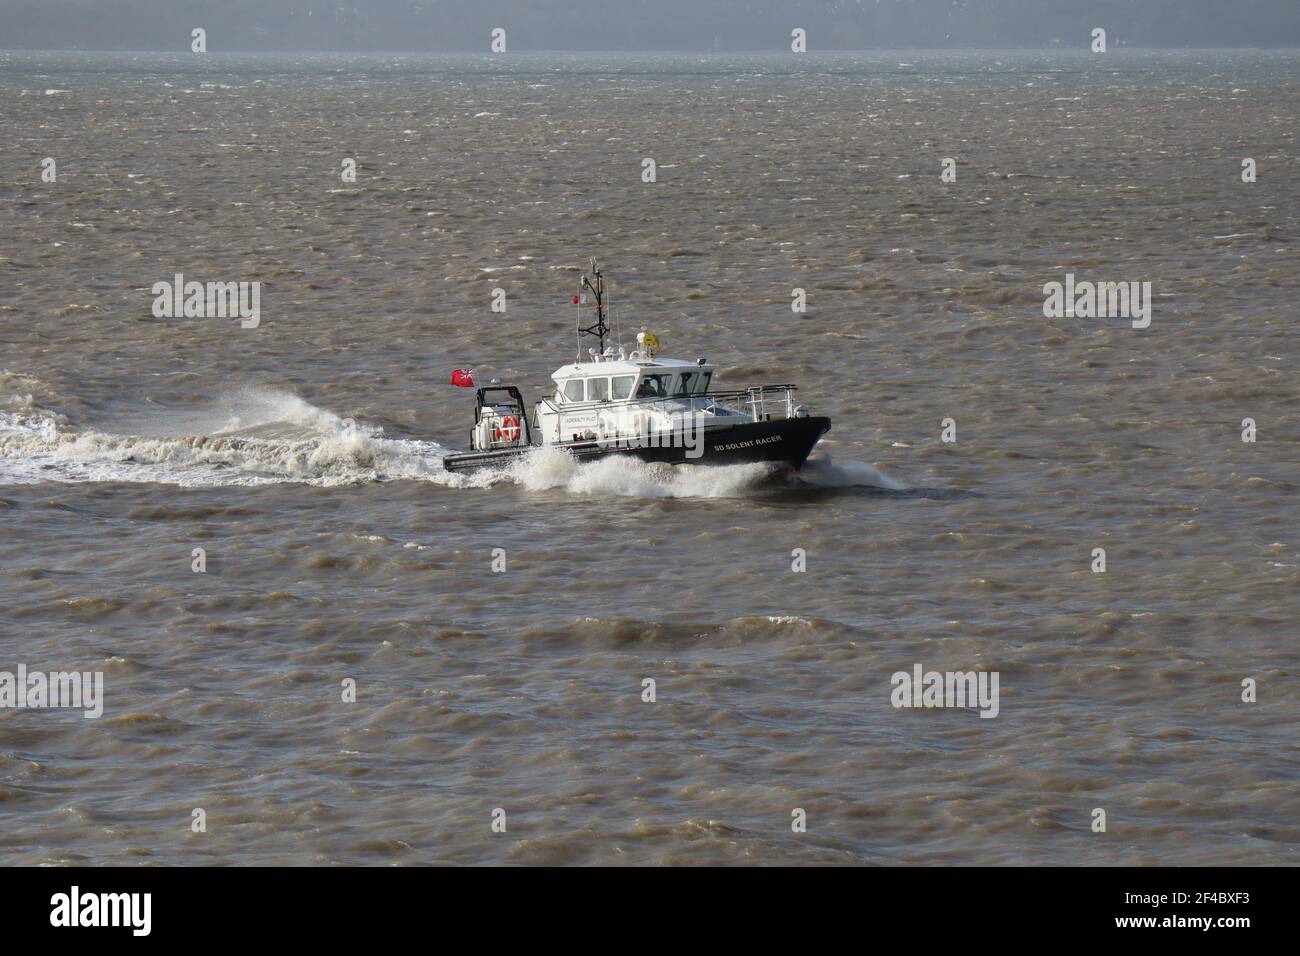 The Admiralty pilot vessel SD SOLENT RACER speeds through the choppy waters of The Solent as it heads back to harbour Stock Photo